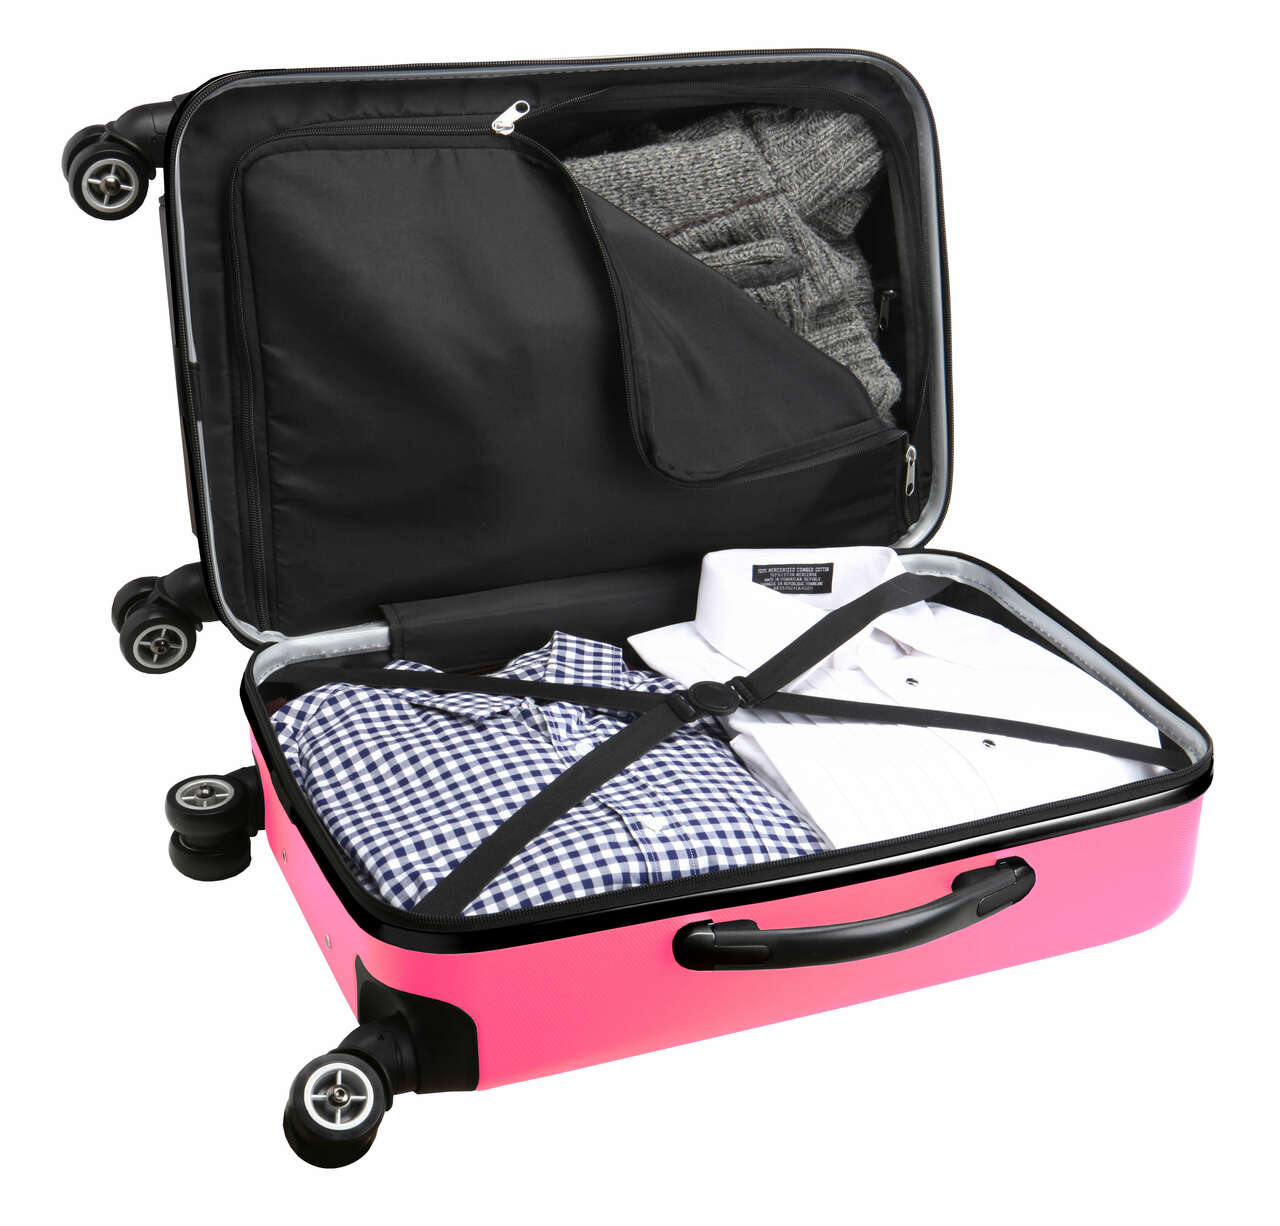 San Diego State Aztecs 20" Pink Domestic Carry-on Spinner